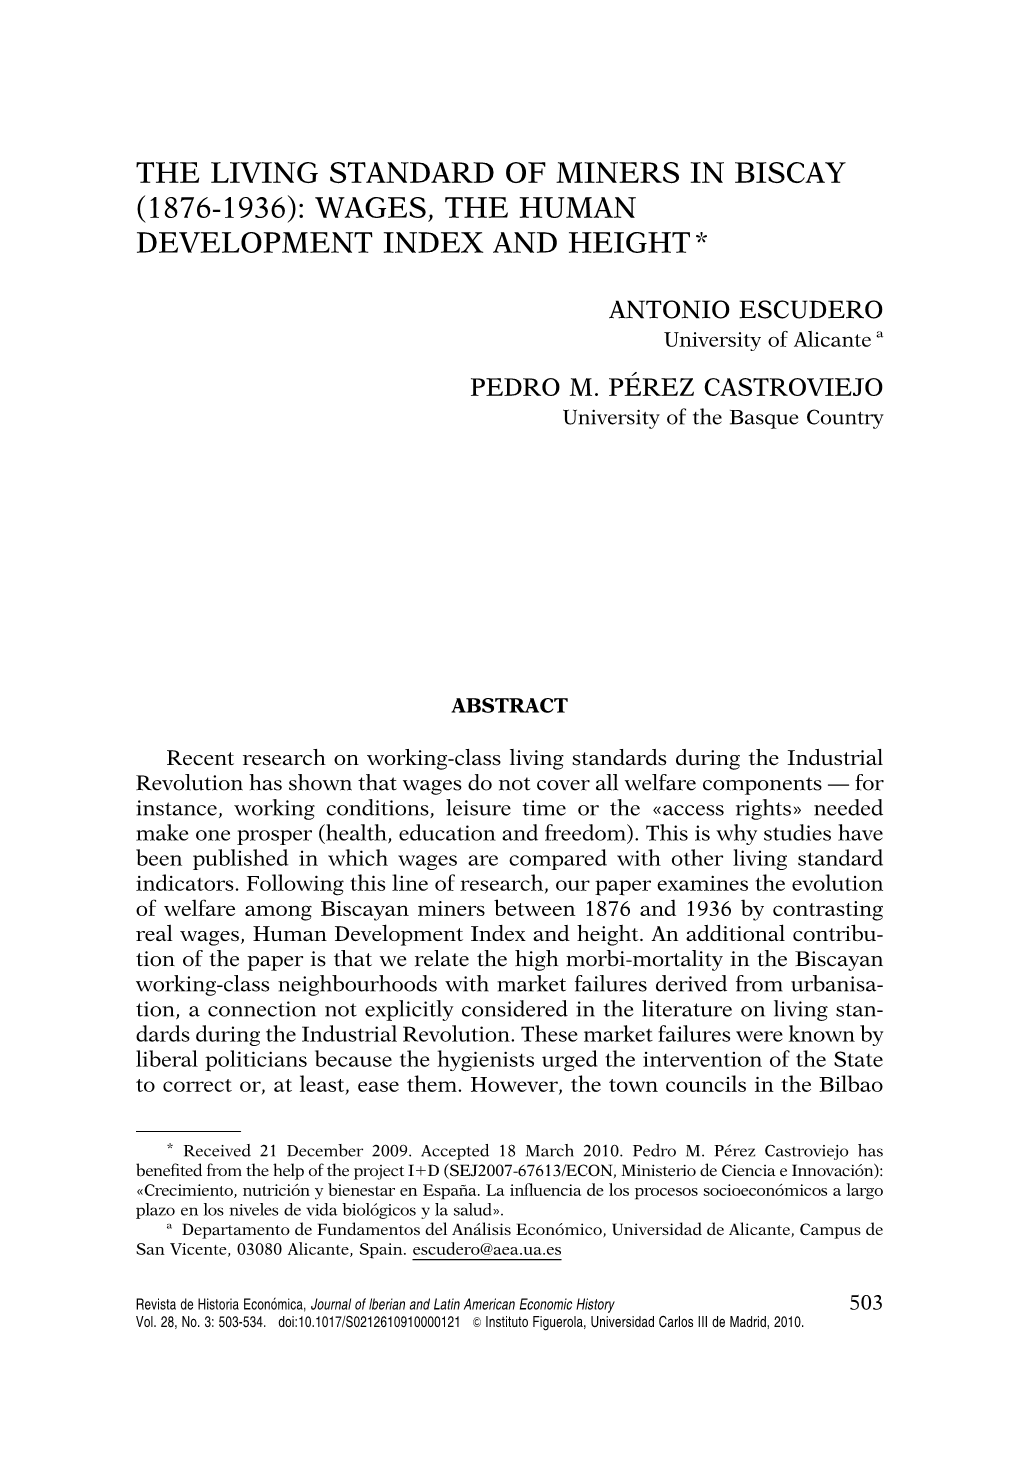 The Living Standard of Miners in Biscay (1876-1936): Wages, the Human Development Index and Height*